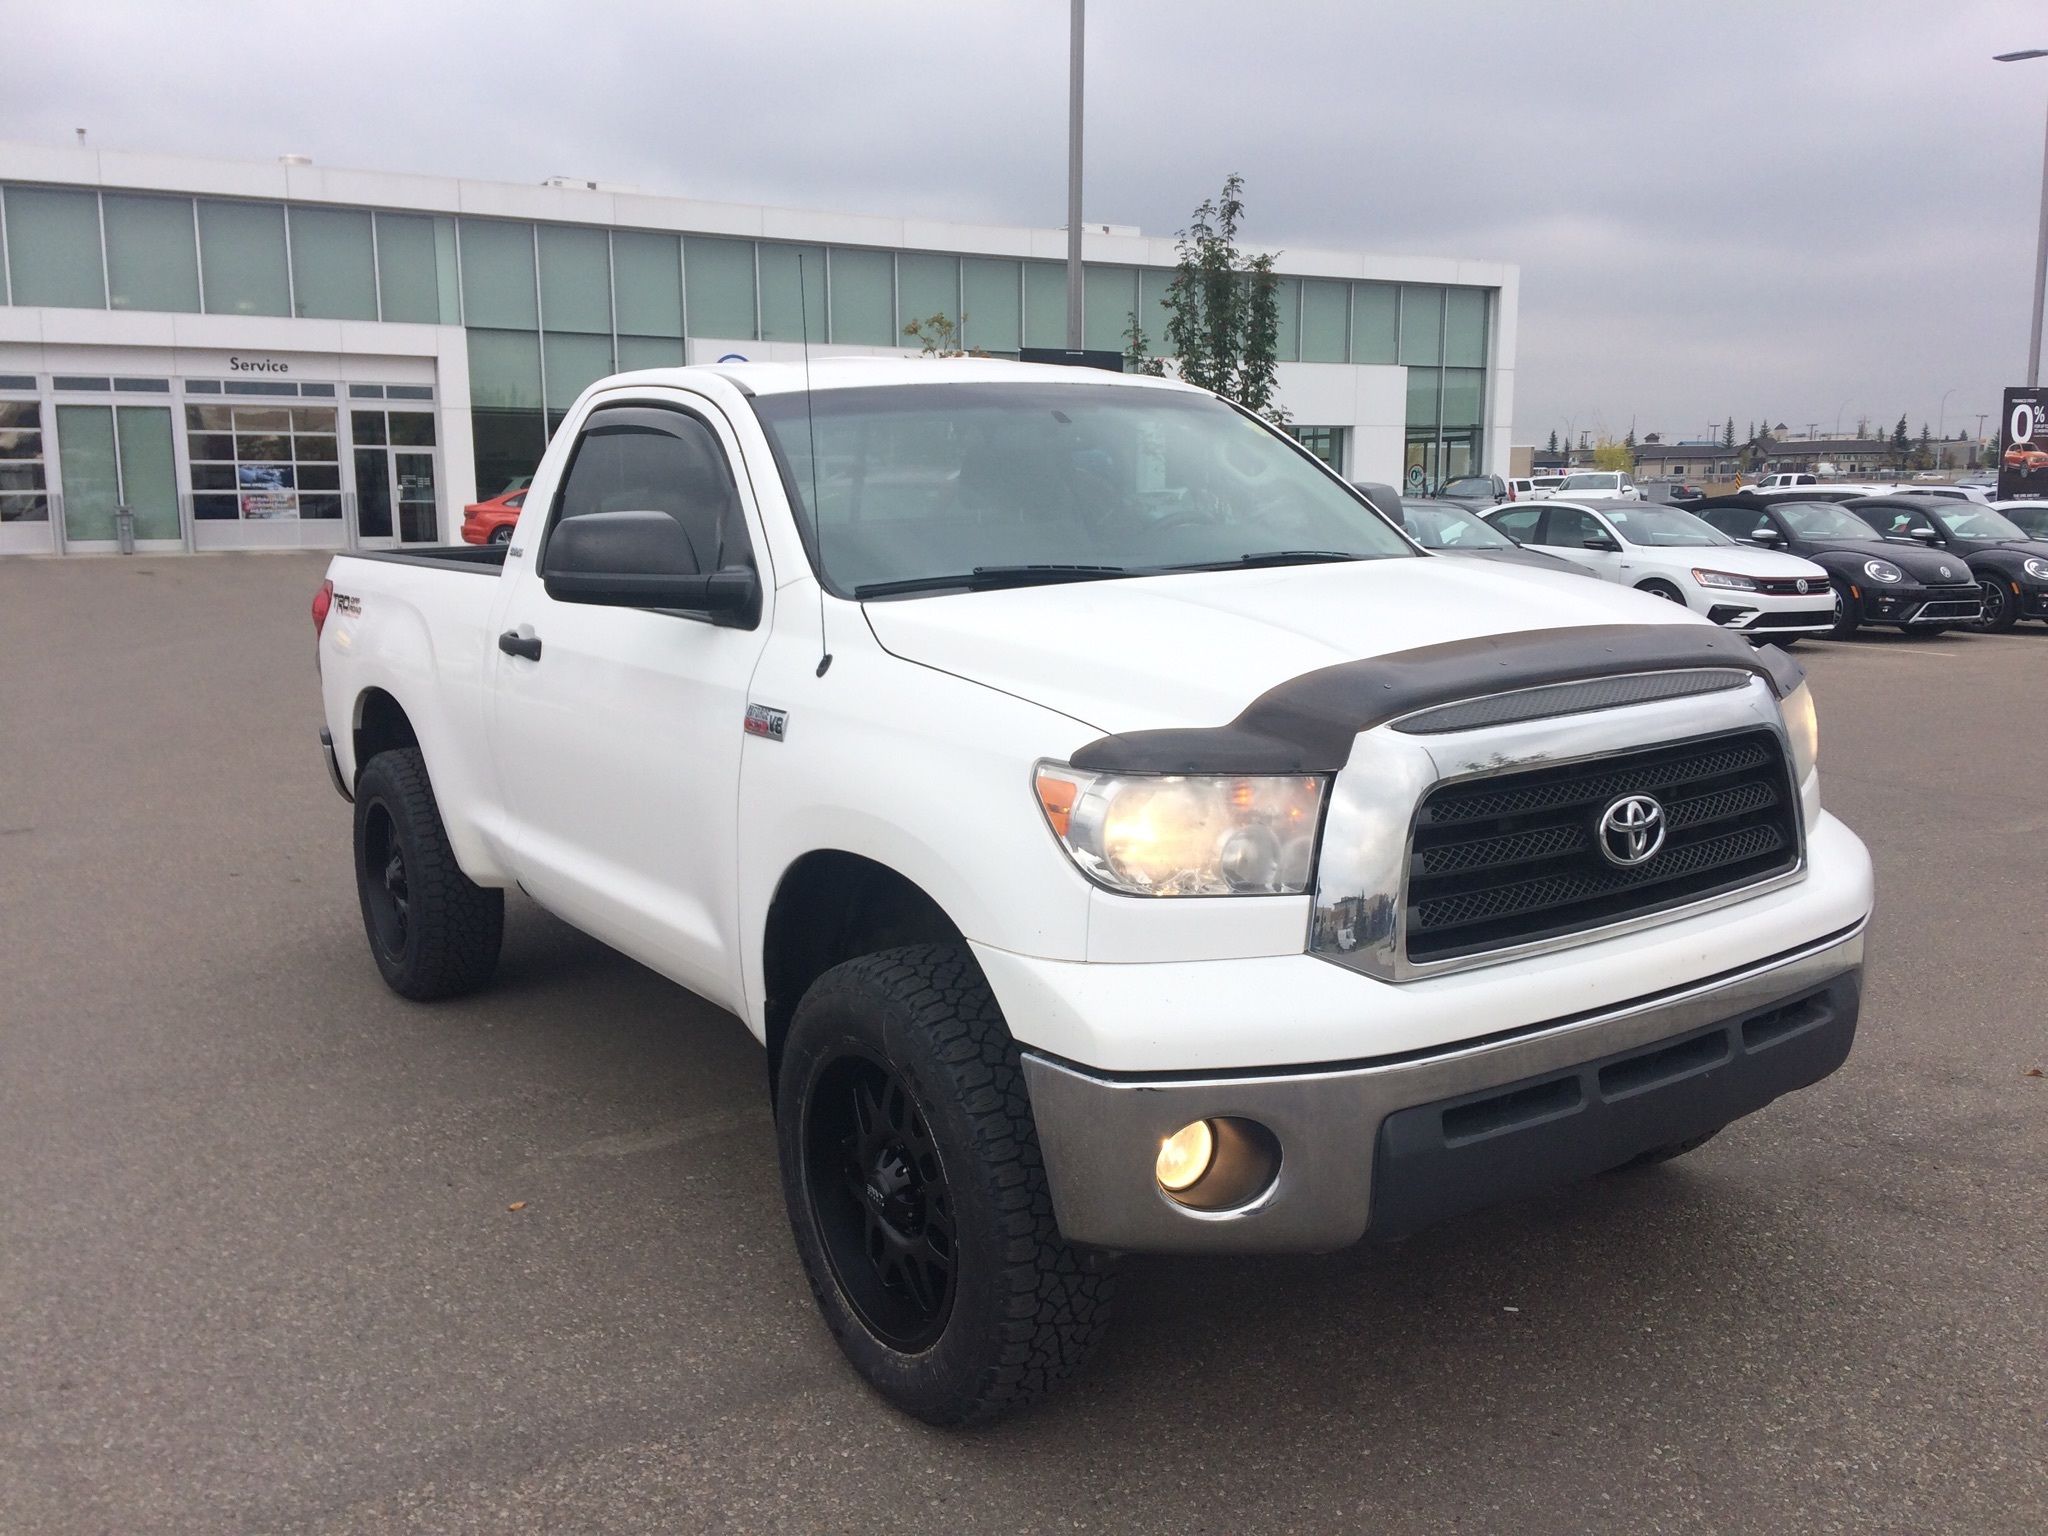 Used 2009 Toyota Tundra 4x4 Reg Cab 5.7 for sale - $16488 | South